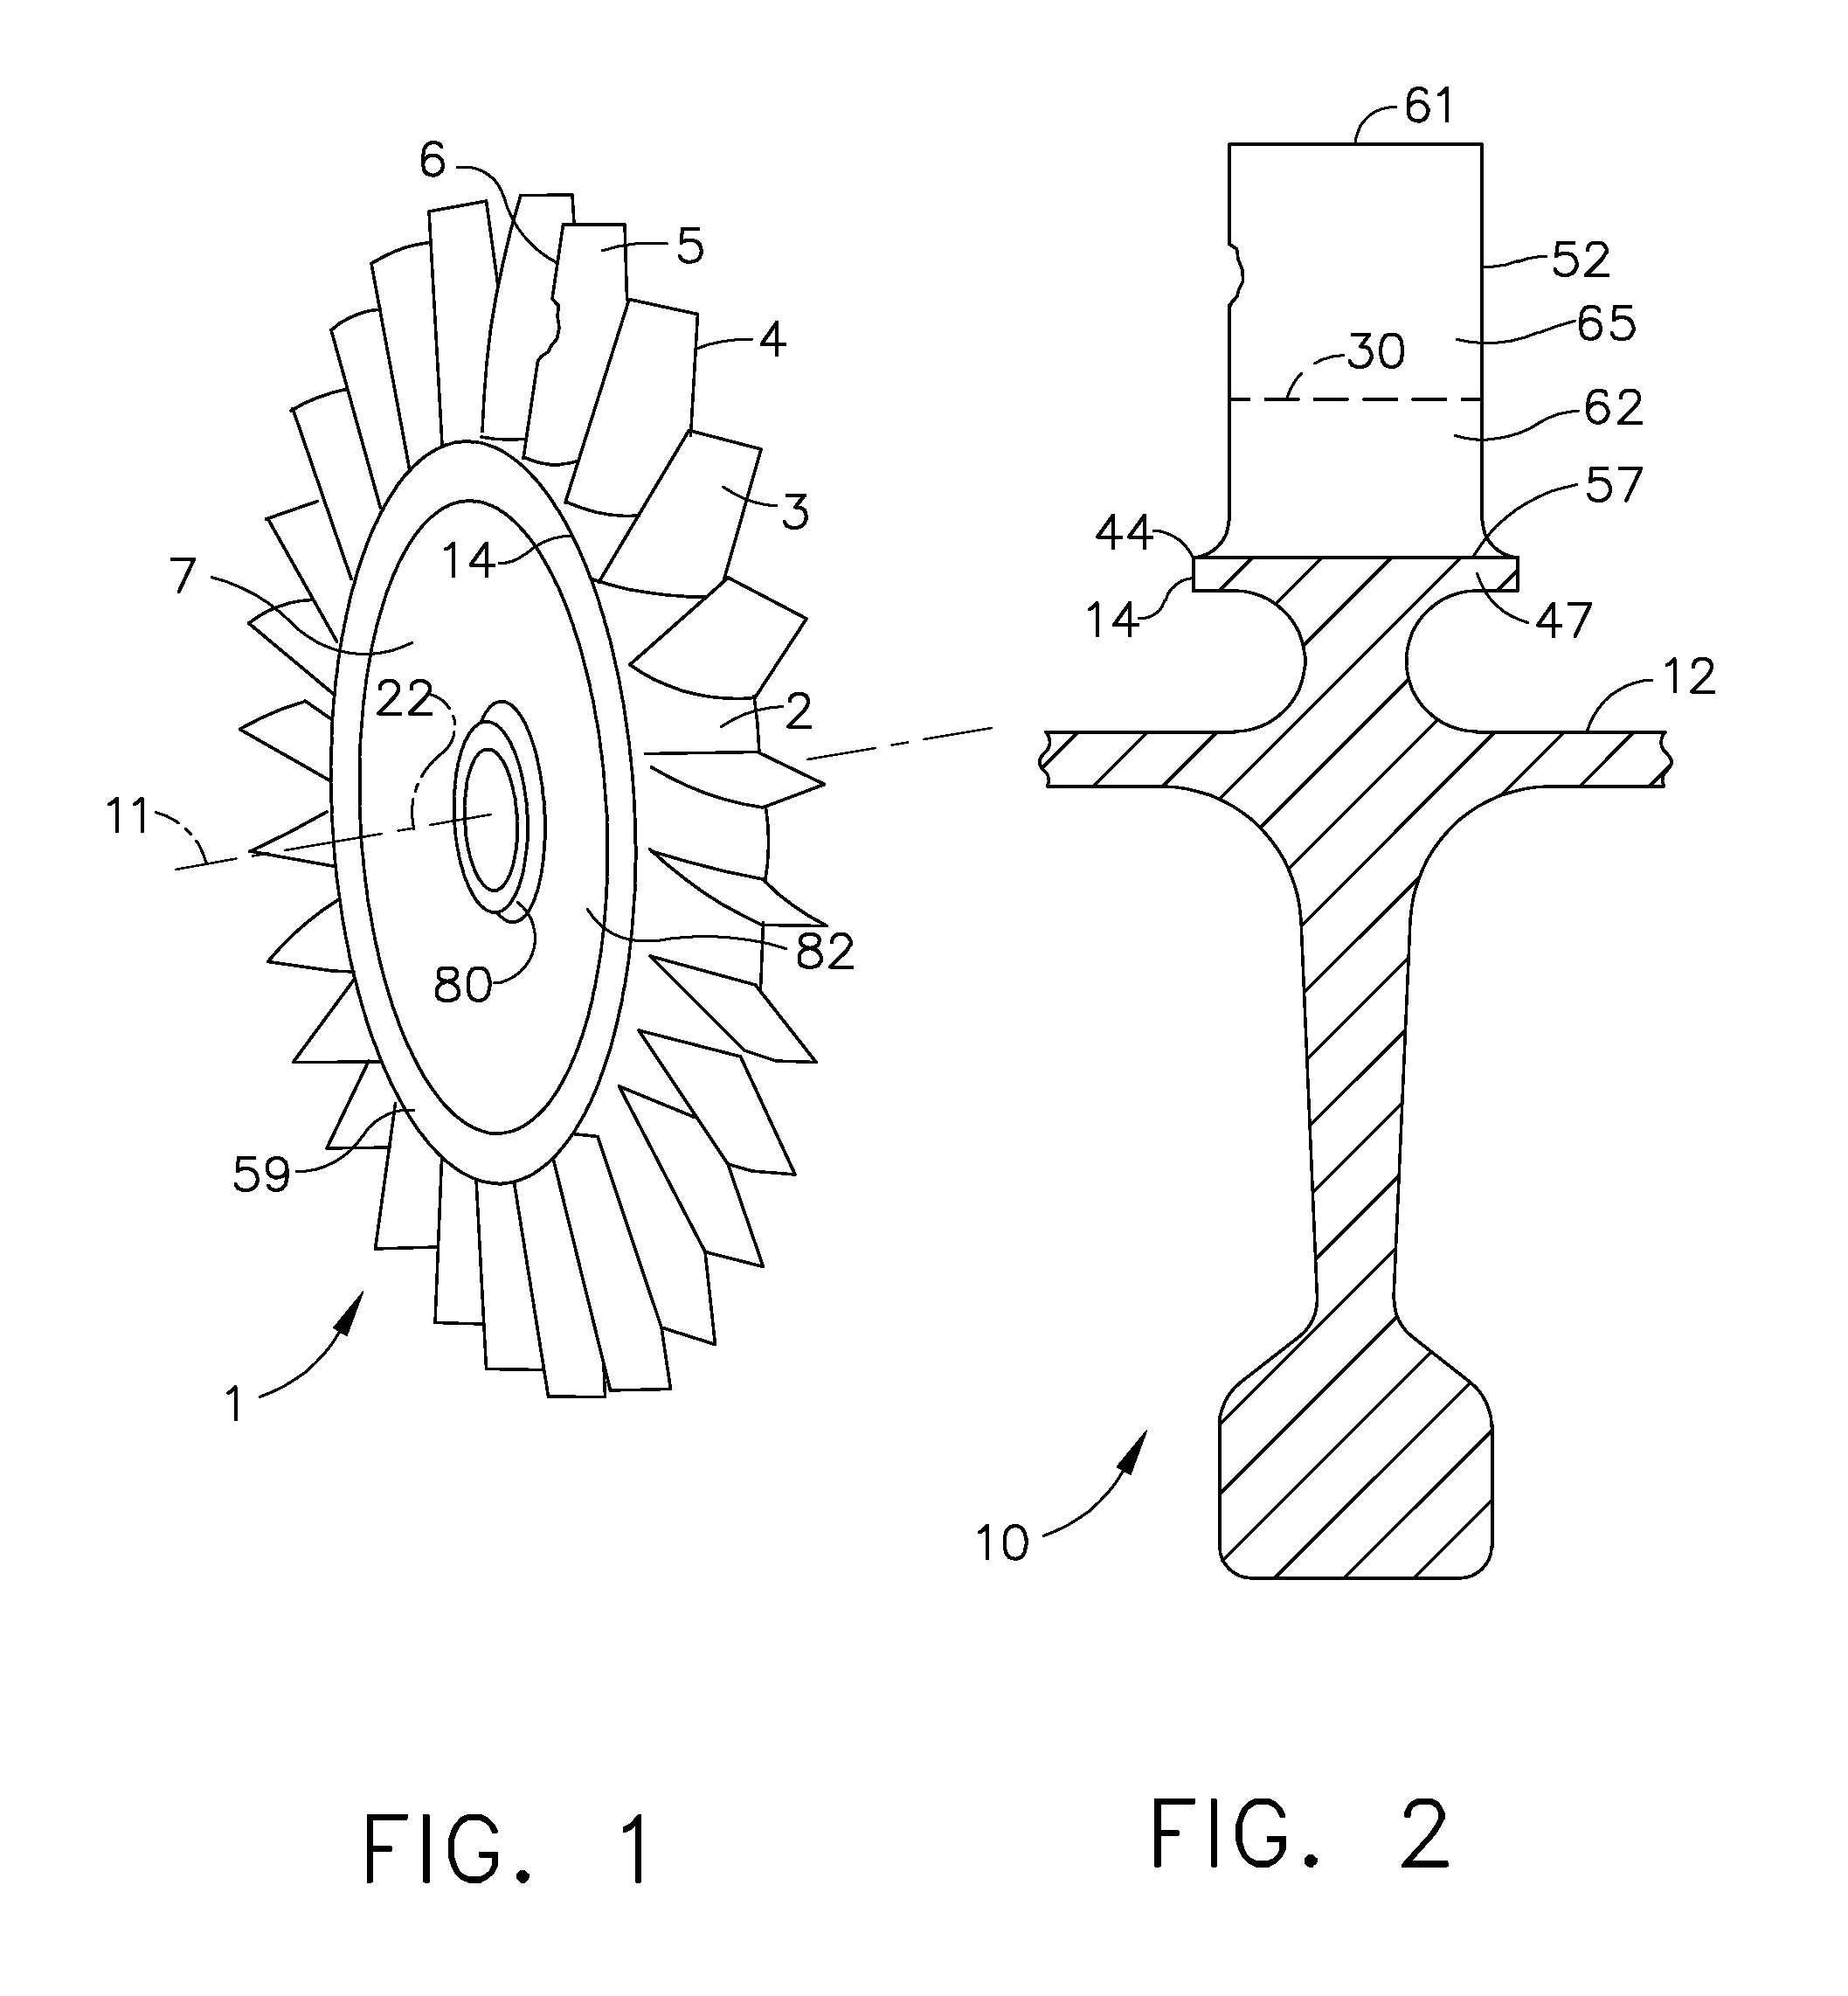 Solid state resistance welding for airfoil repair and manufacture